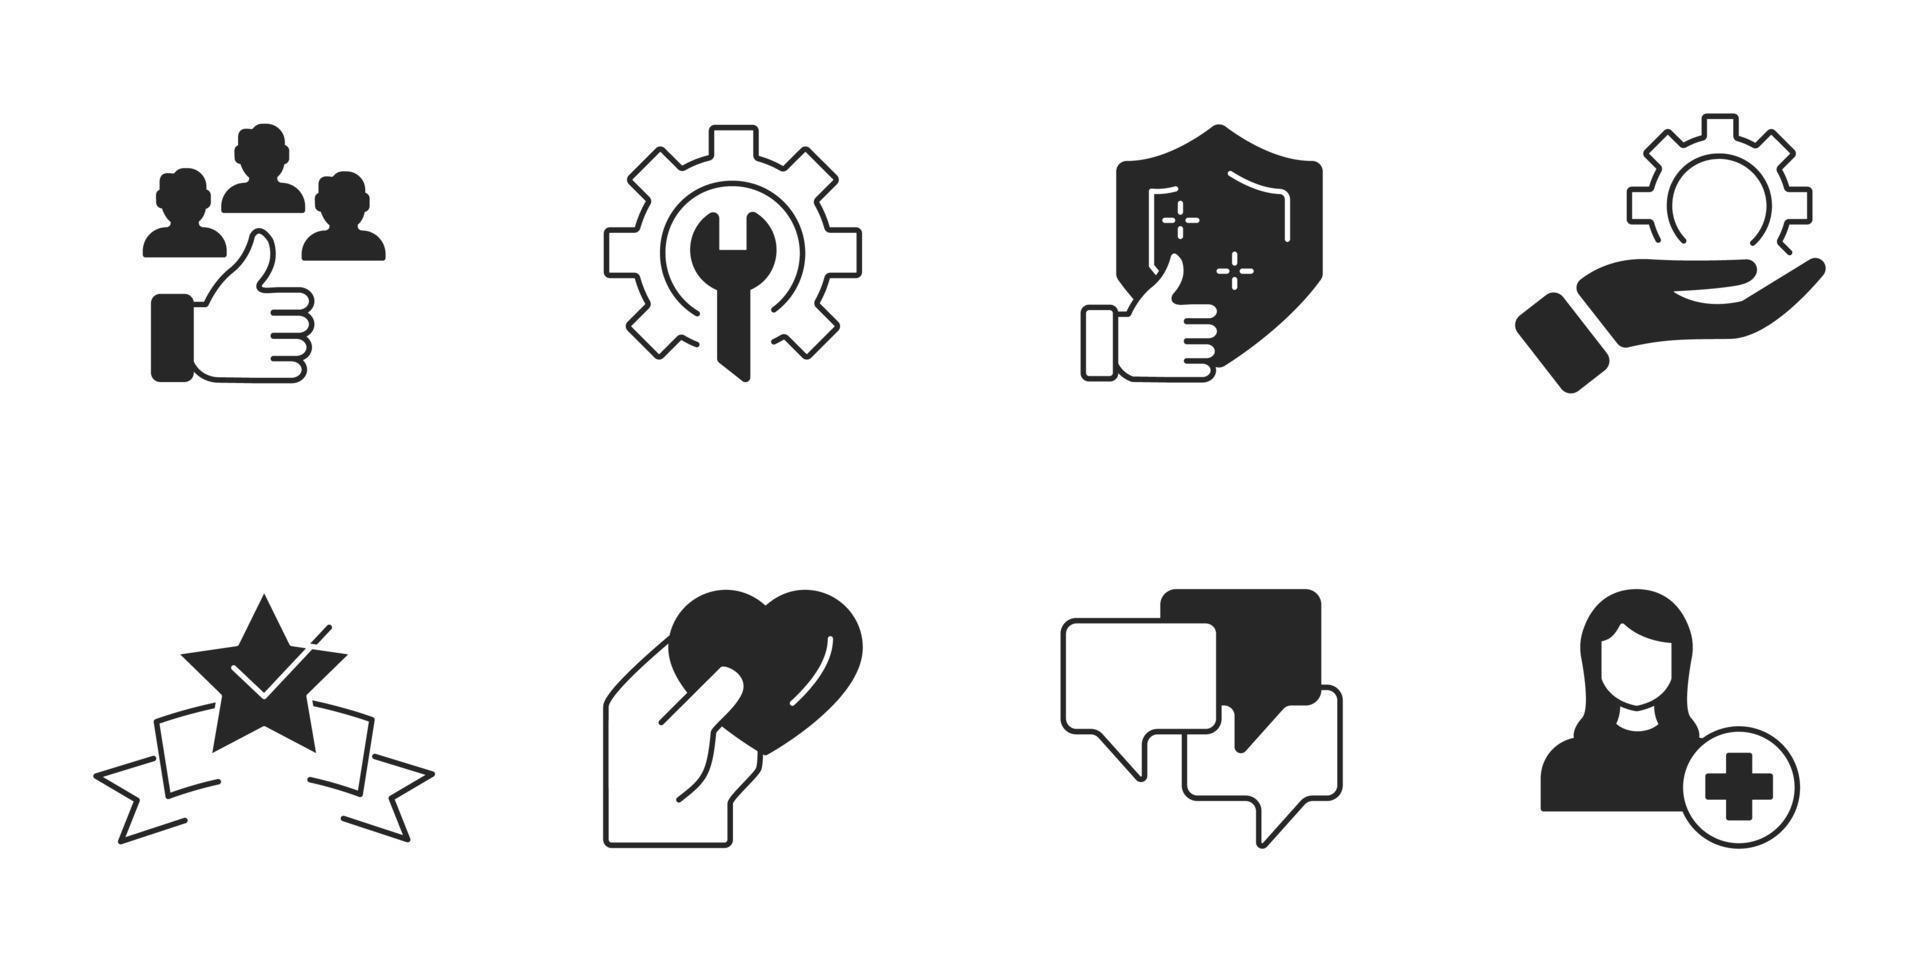 Customer Care icons set . Customer Care pack symbol vector elements for infographic web